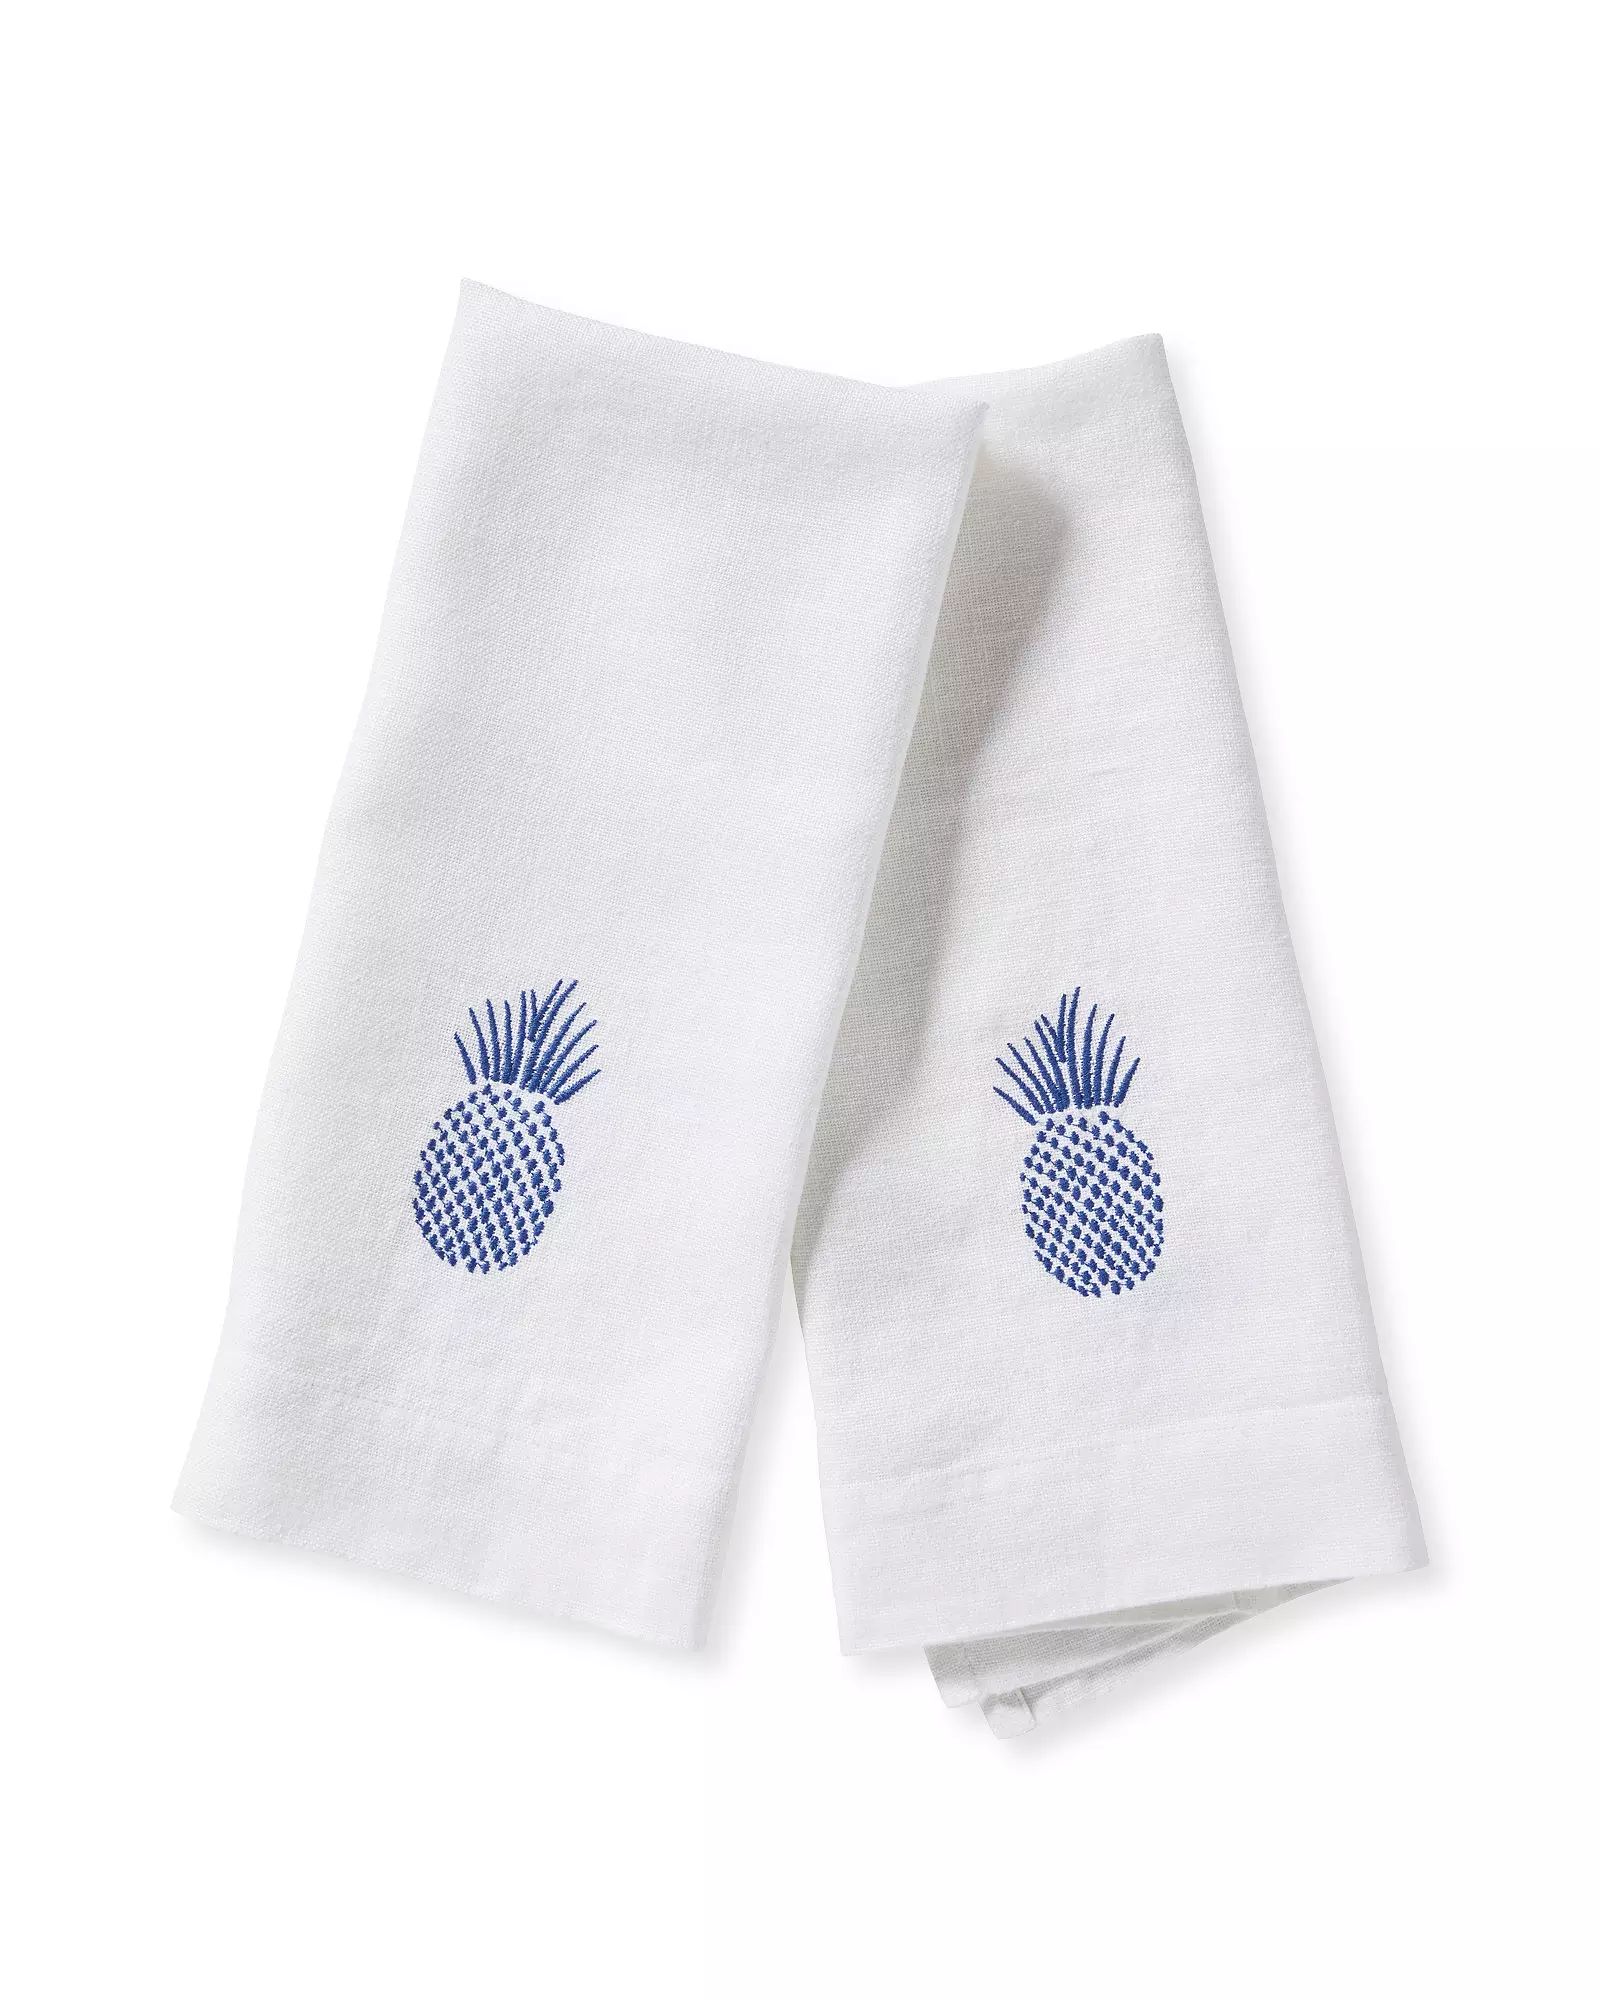 Isla Guest Towels (Set of 2) | Serena and Lily